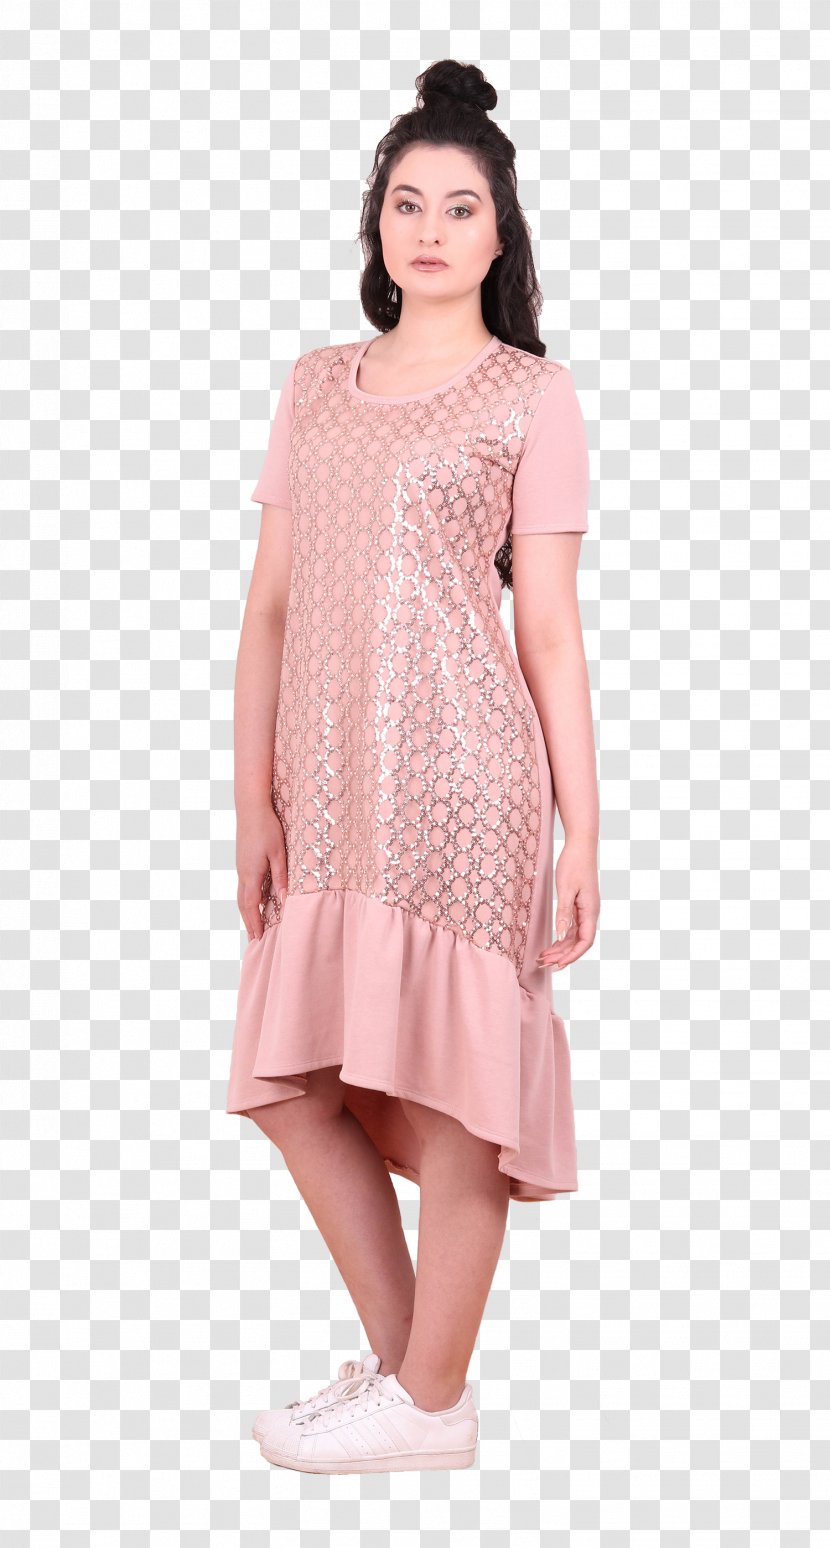 Dress Sleeve Fashion Top Clothing - Silhouette Transparent PNG